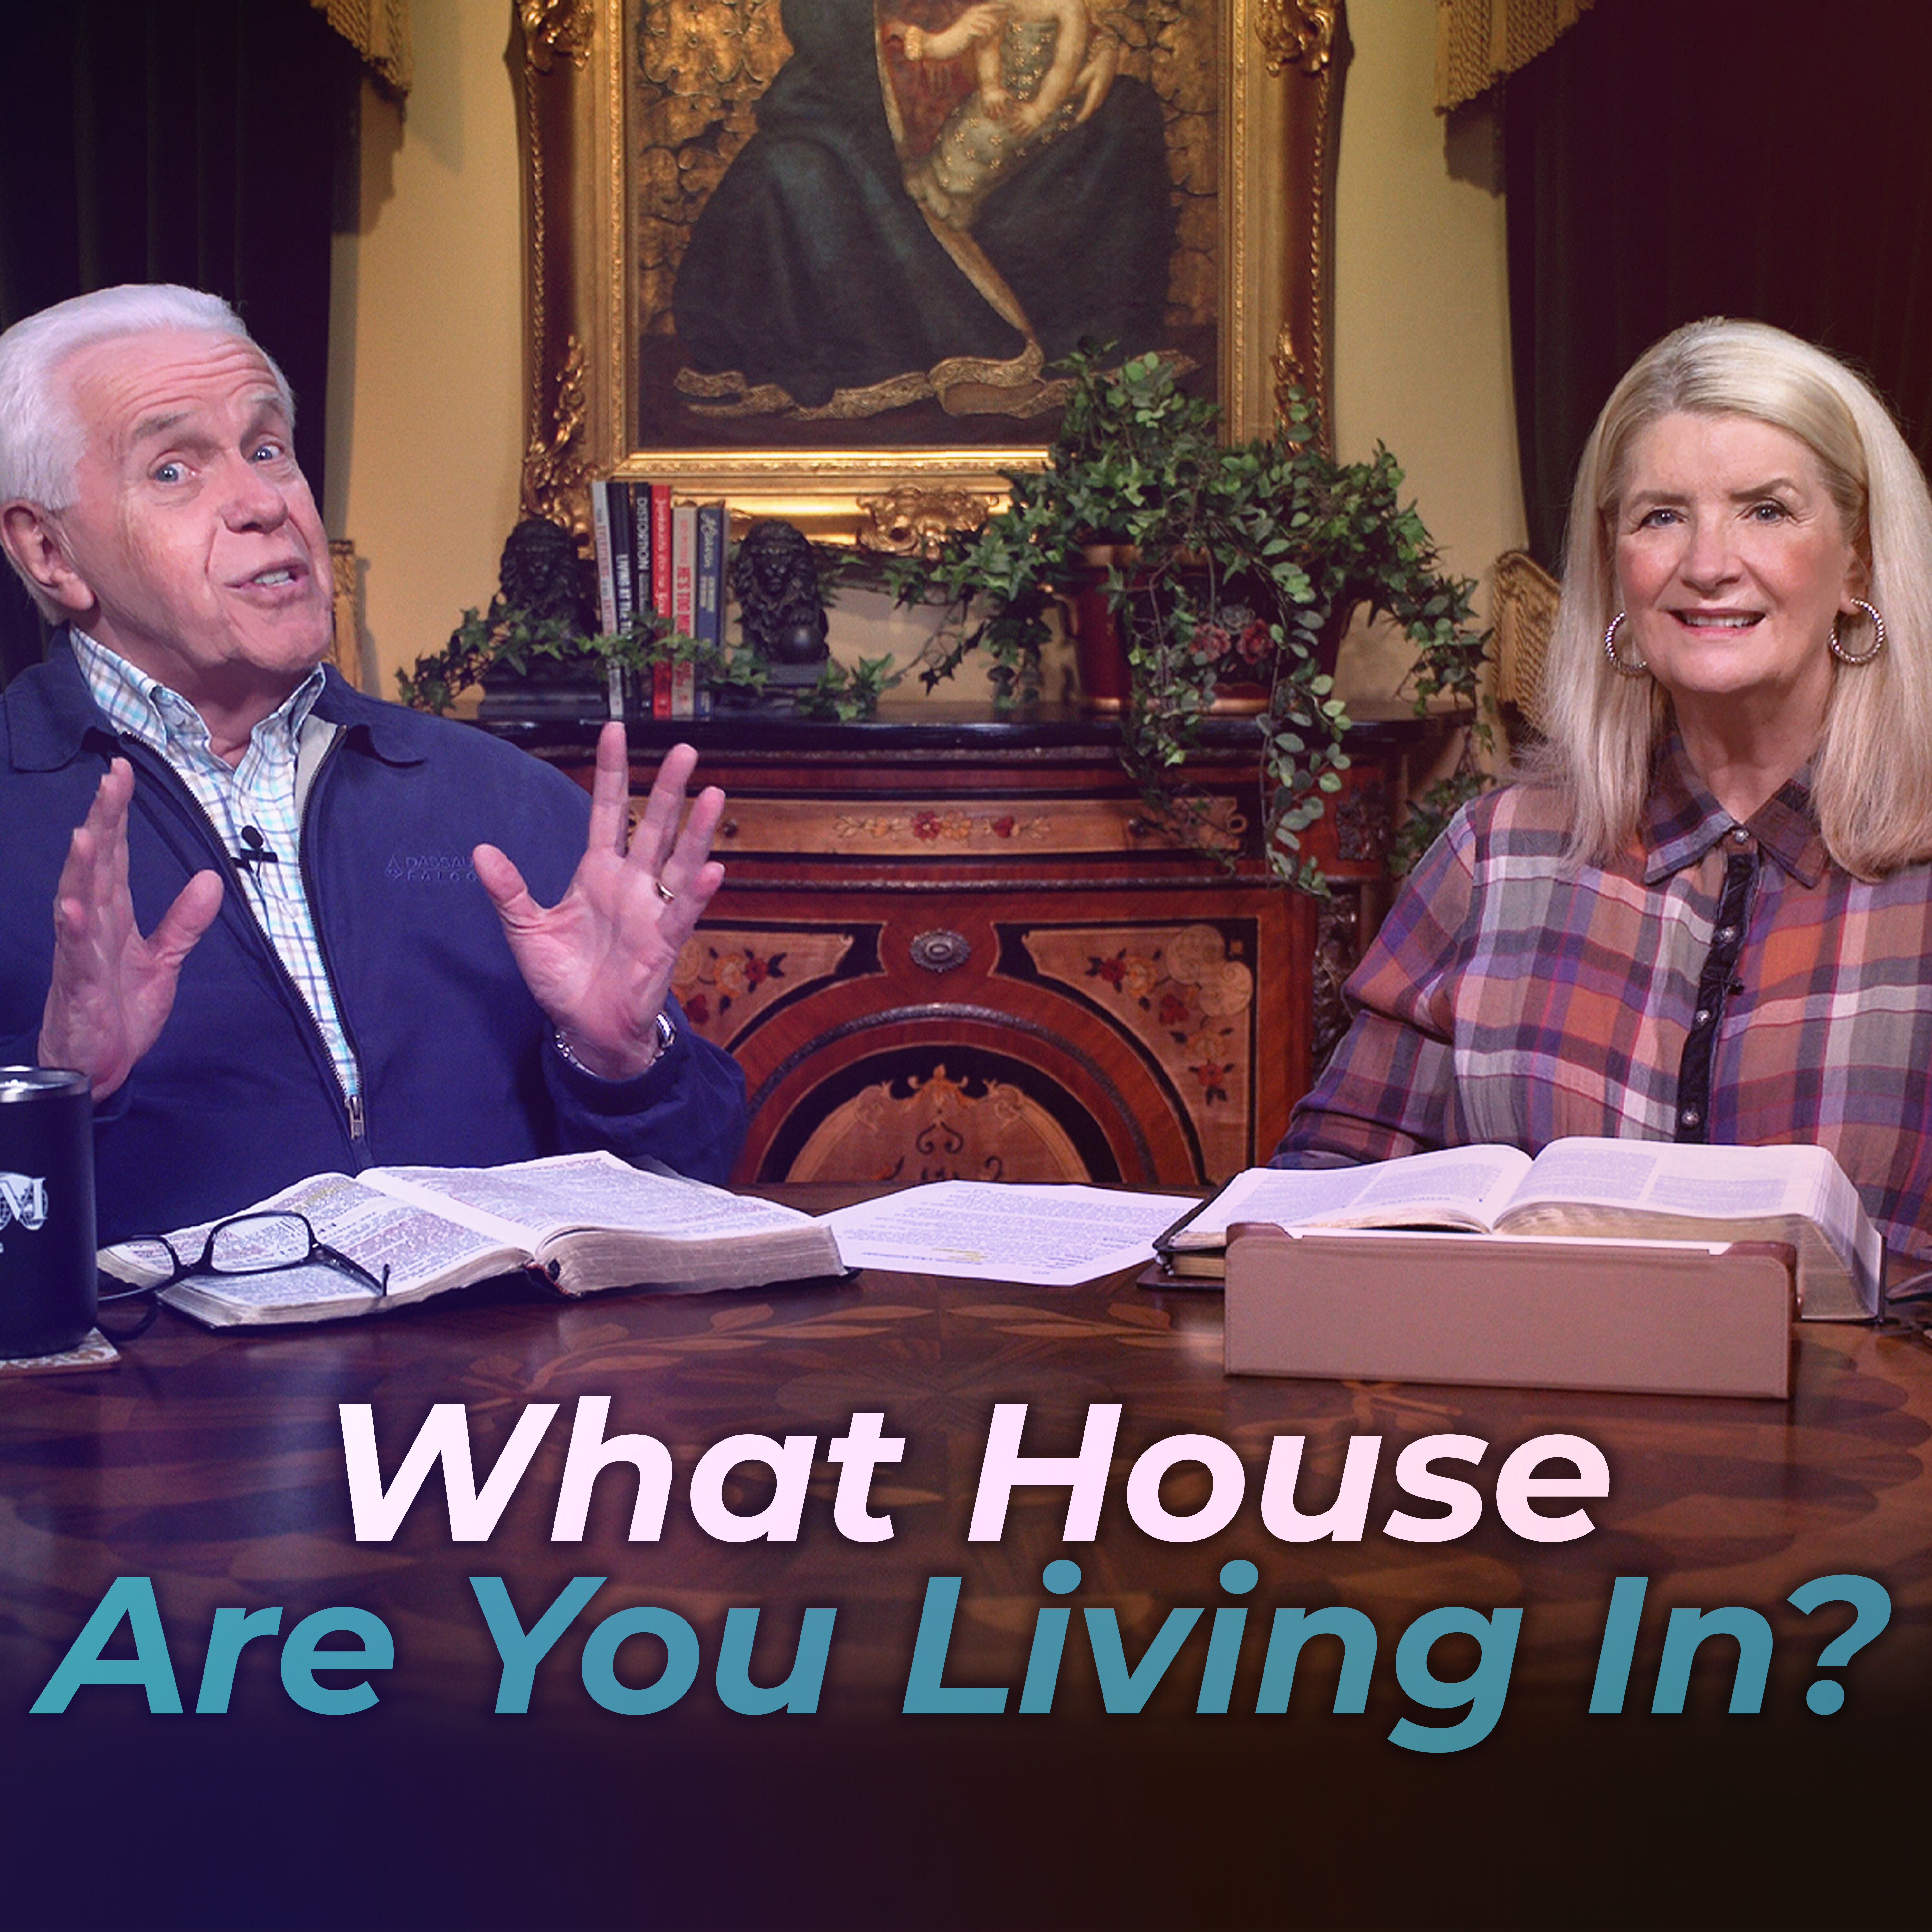 What House Are You Living In?